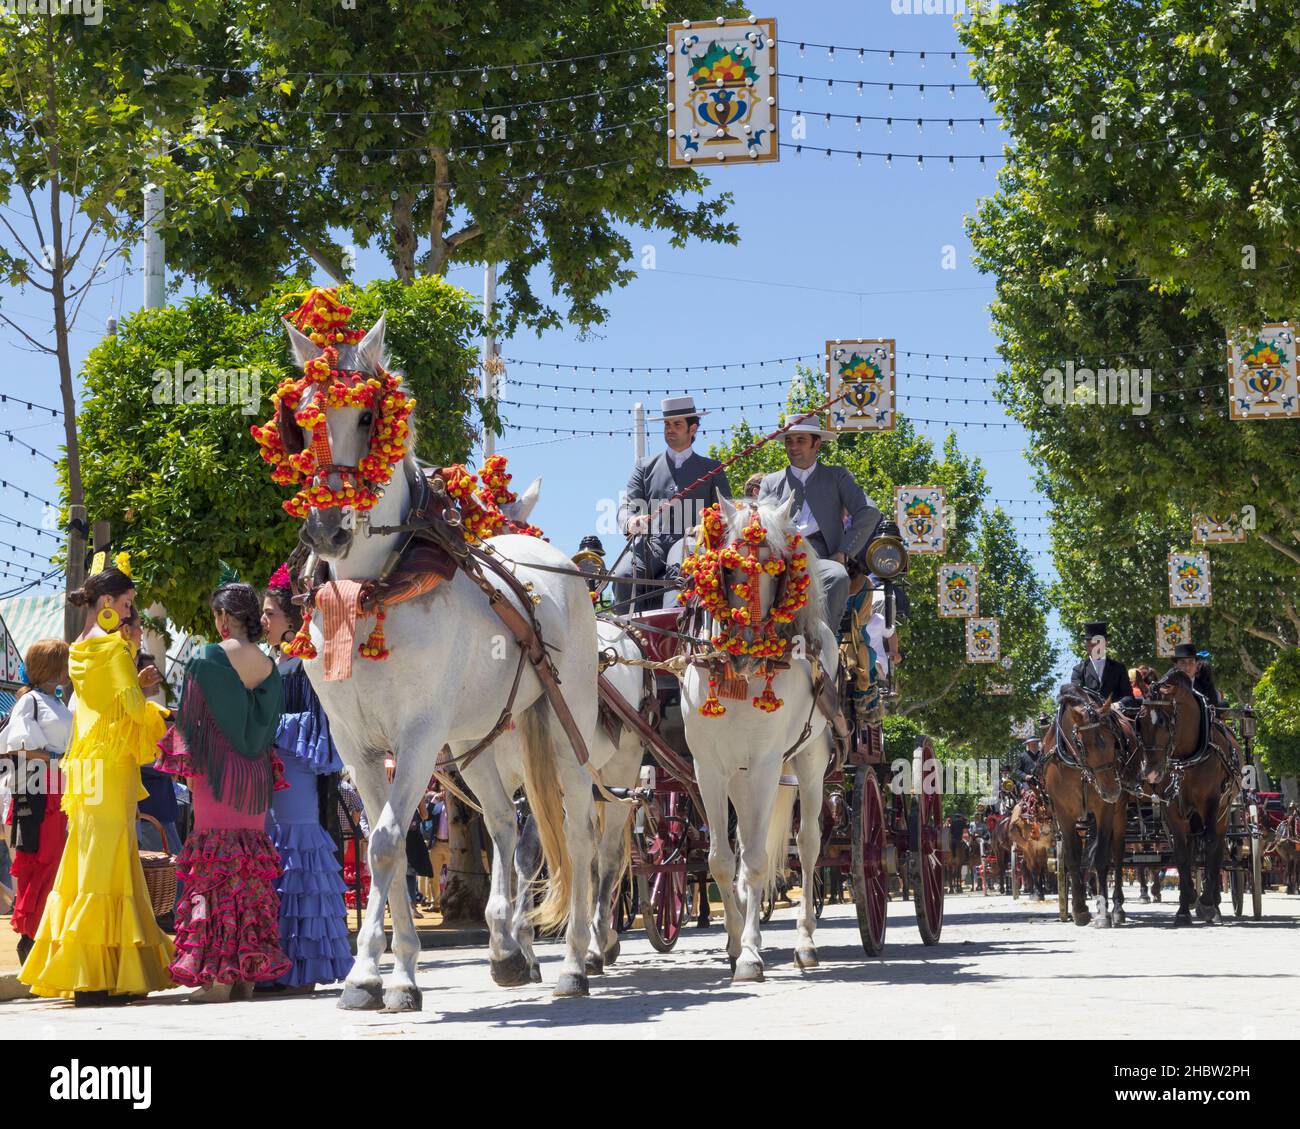 Seville, Seville Province, Andalusia, southern Spain.  Feria de Abril, the April Fair.  Horse and carriage parade. Stock Photo